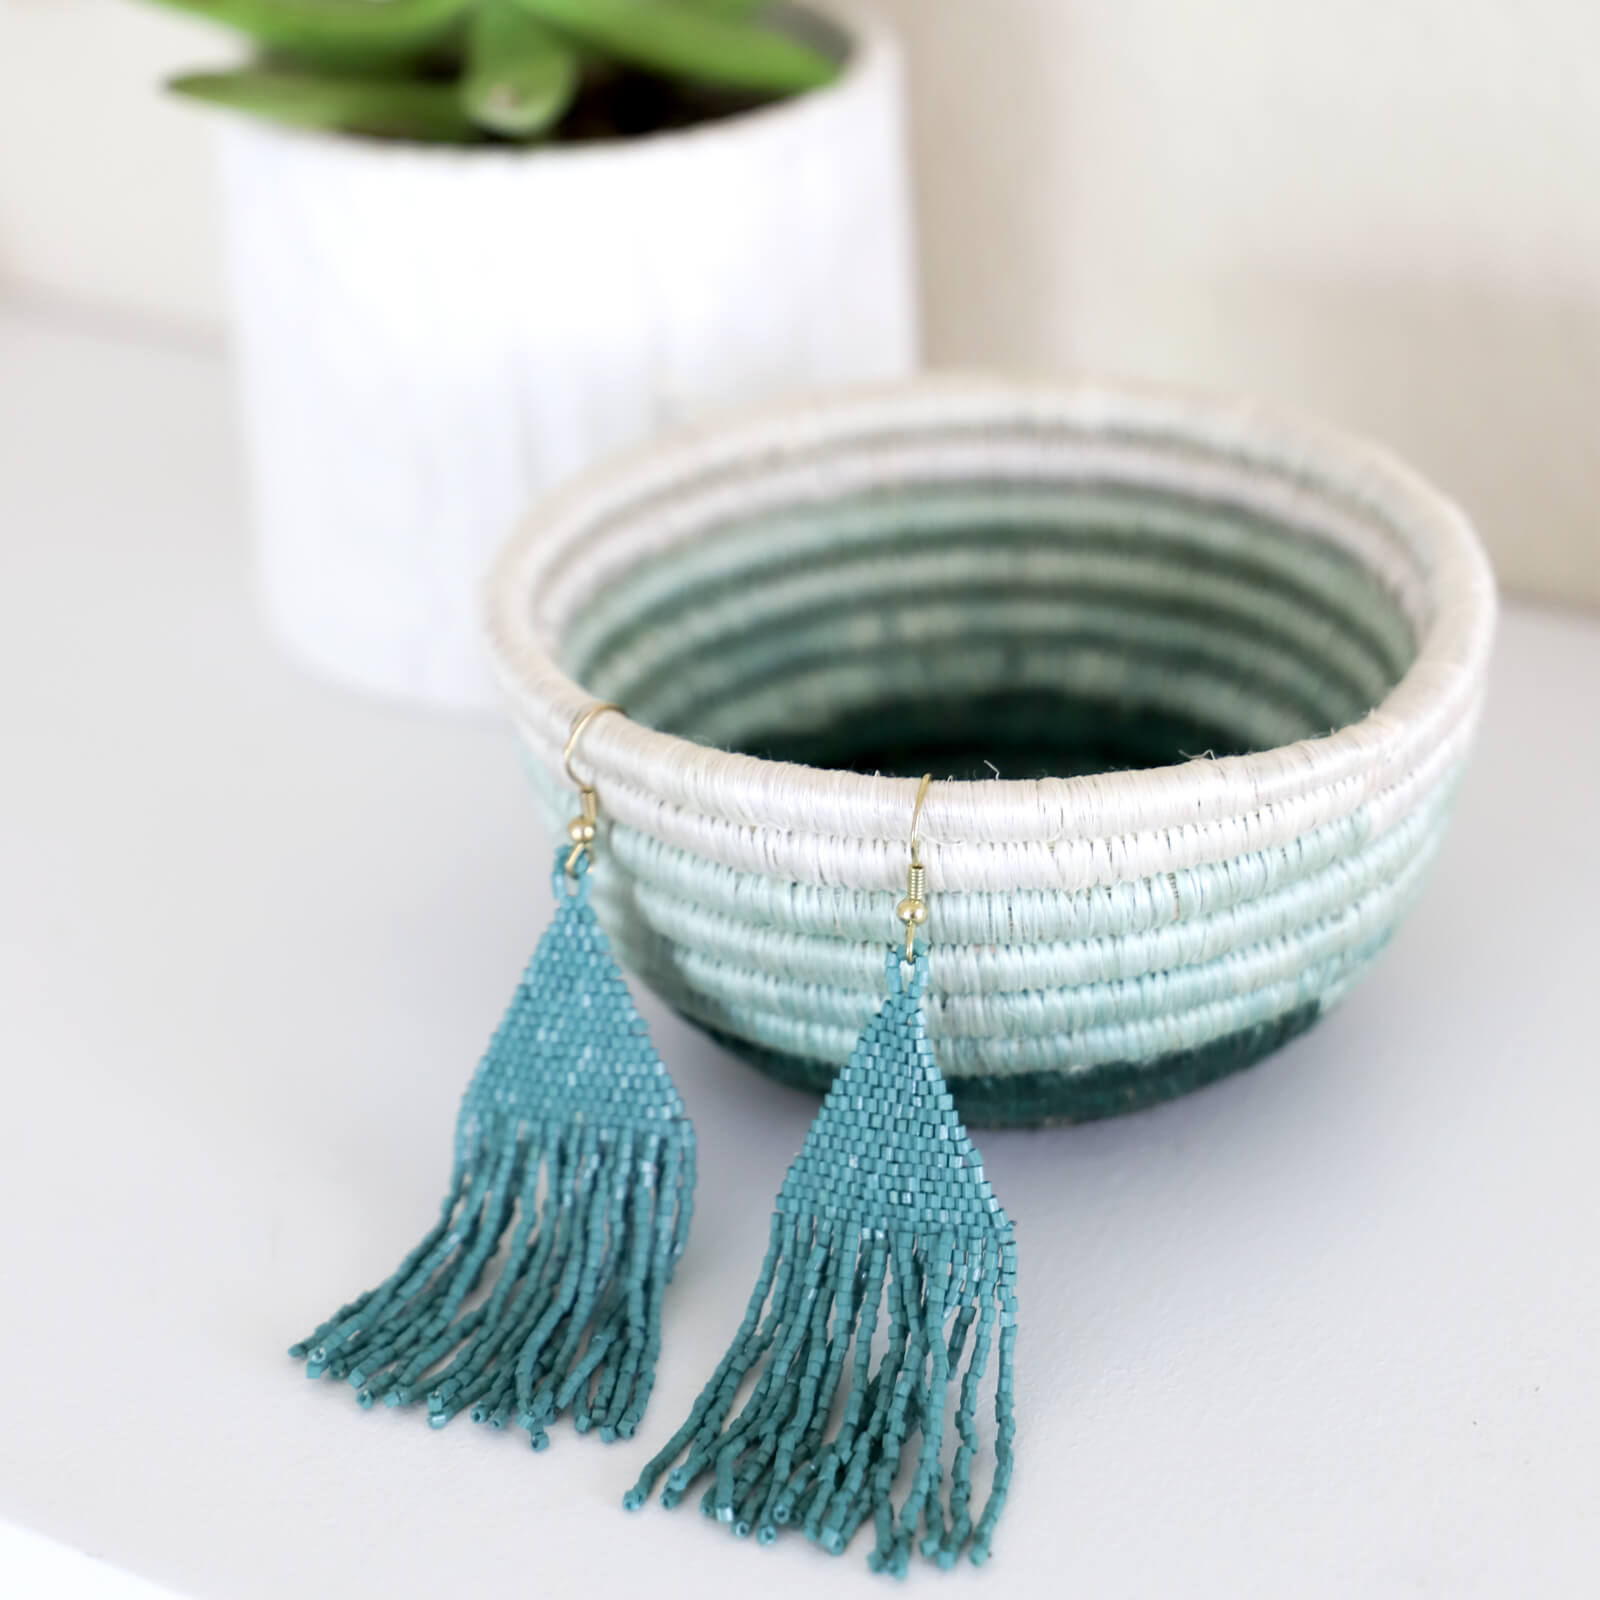 Hand Woven Tiny Catch-All Basket - Teal Ombré Stripe